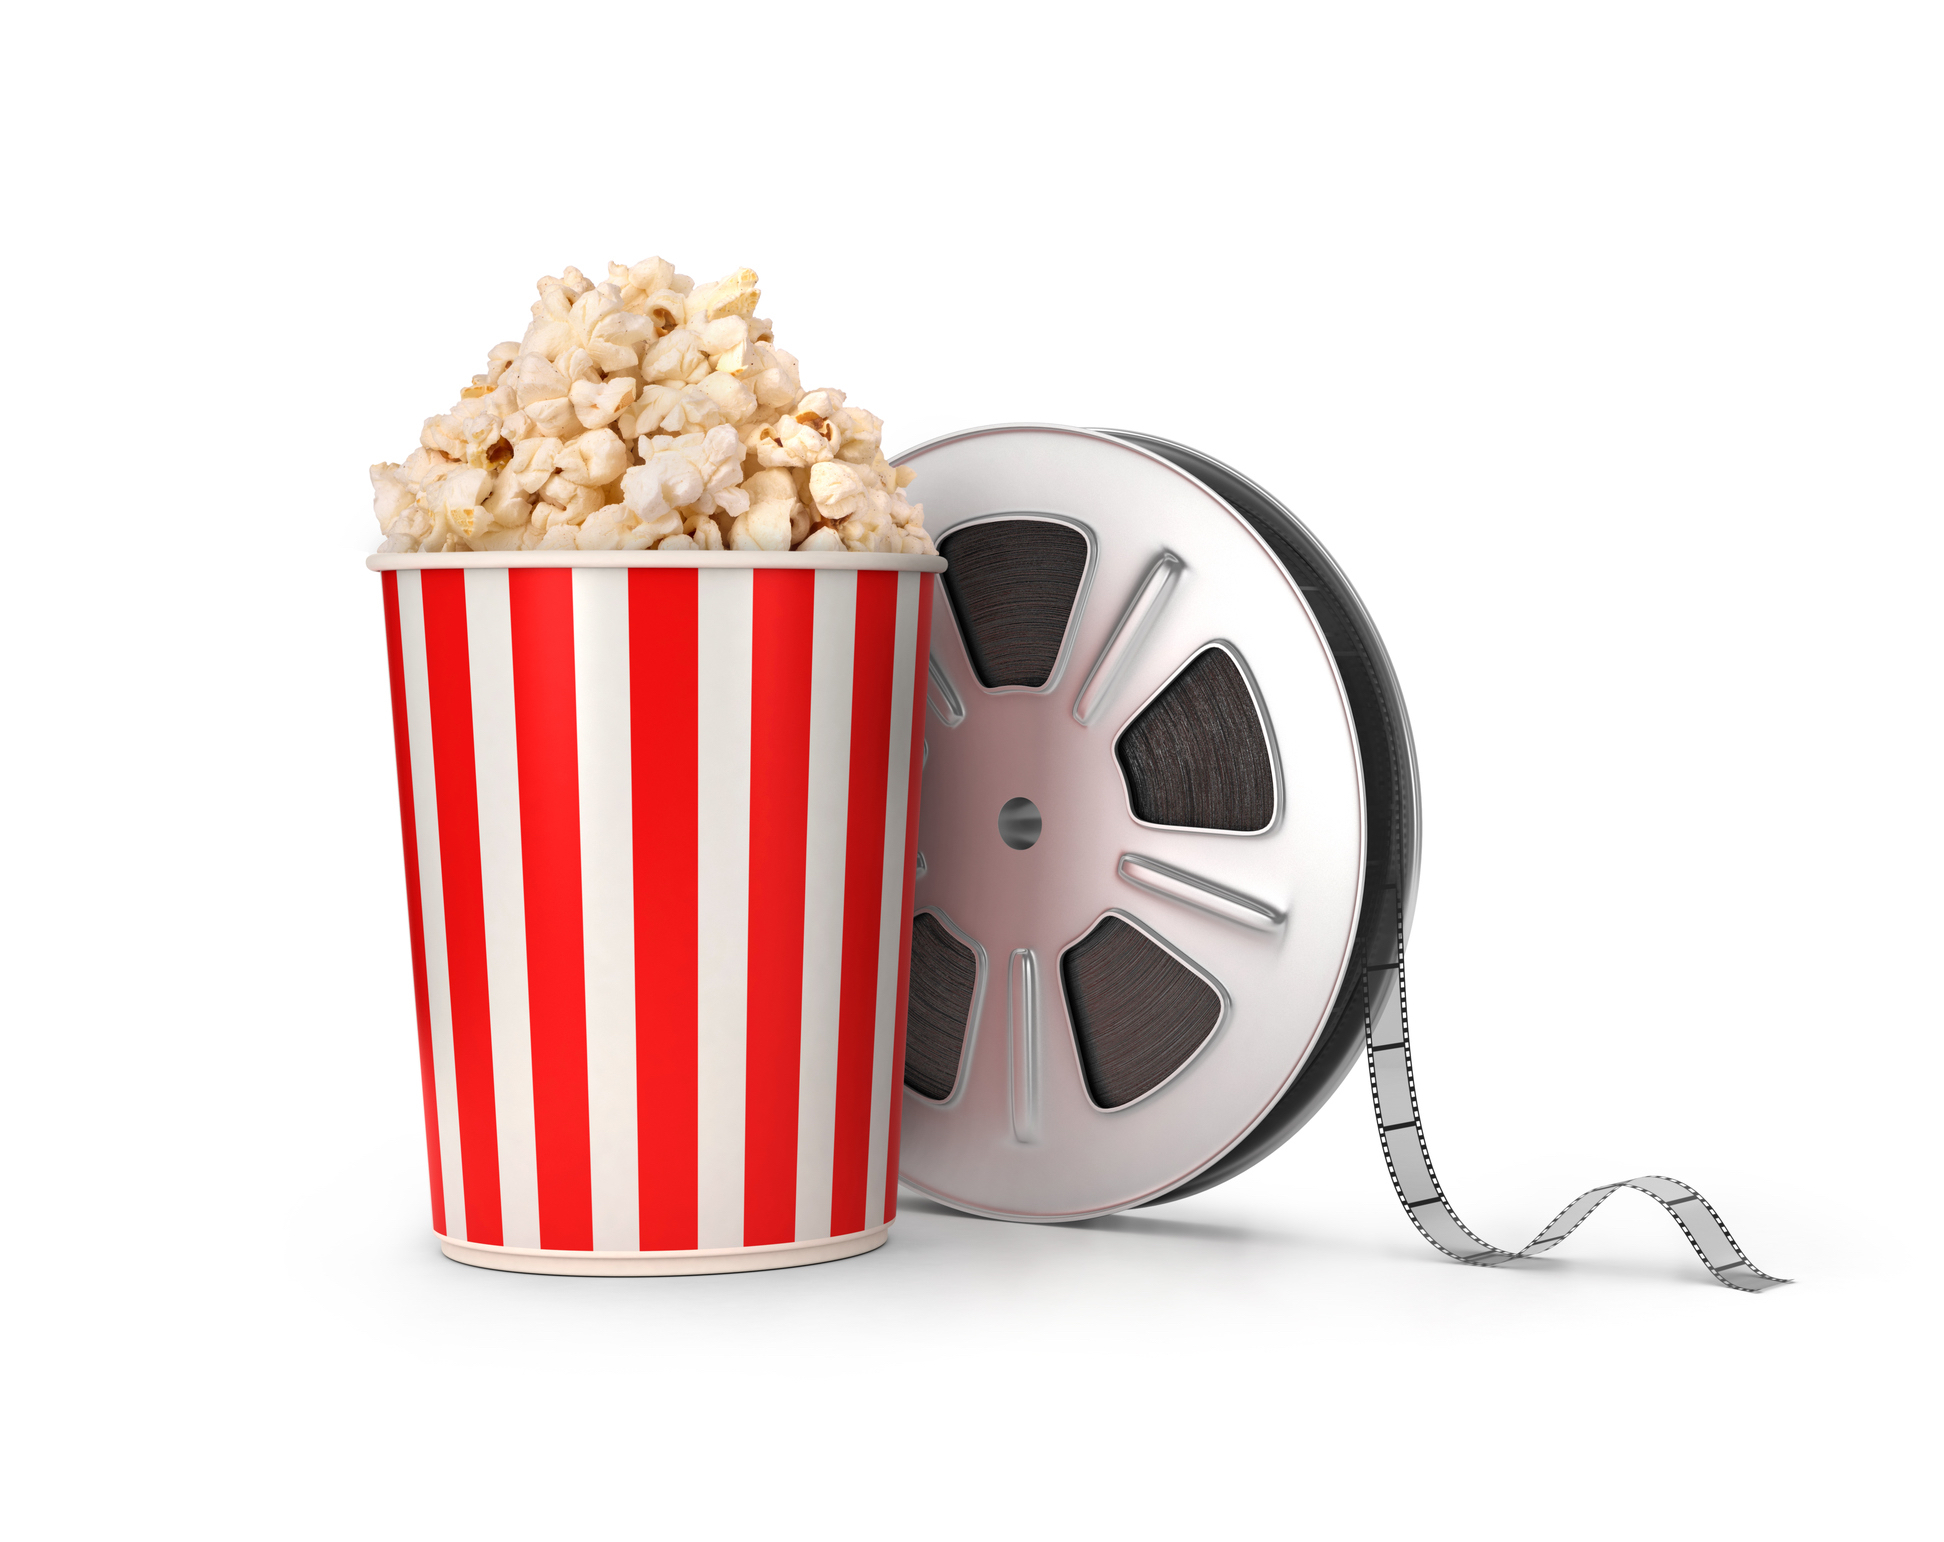 The film reel and the popping corn